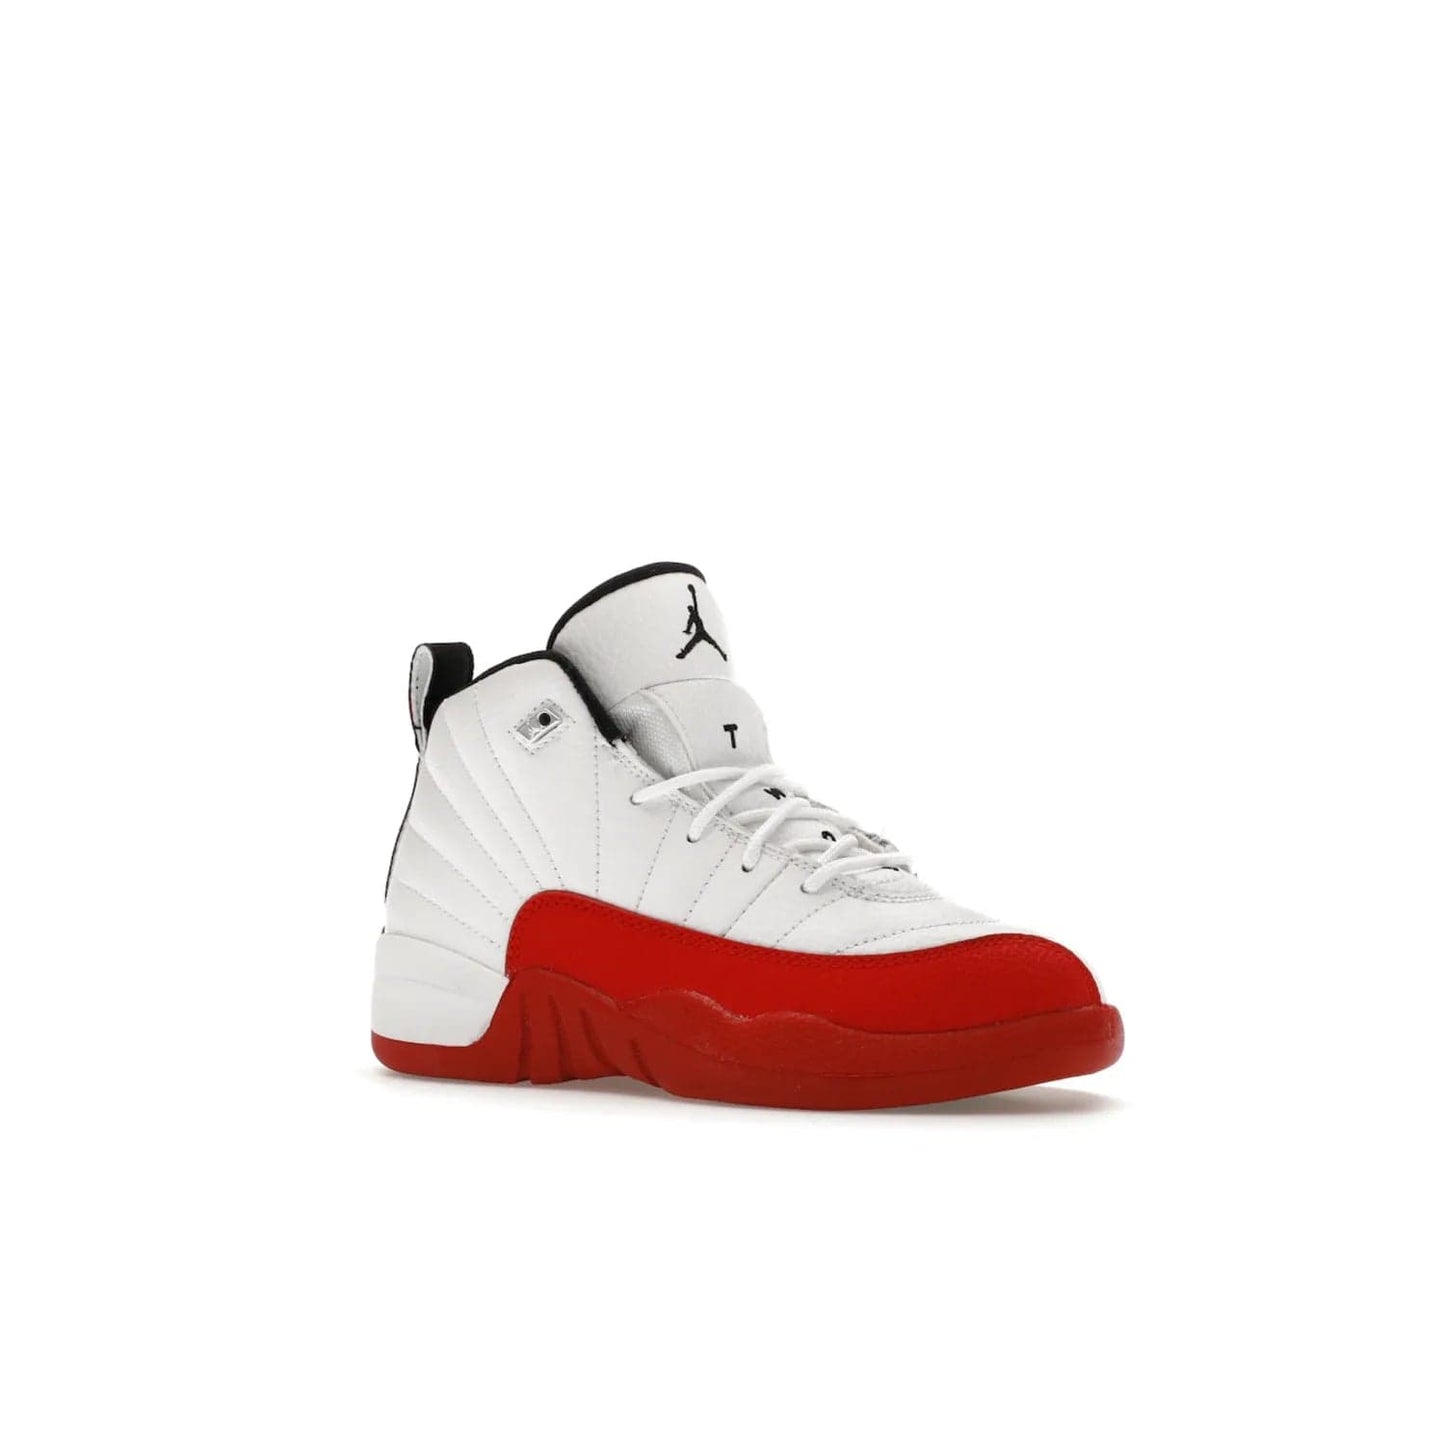 Jordan 12 Retro Cherry (2023) (PS) - Image 4 - Only at www.BallersClubKickz.com - Jordan 12 Retro Cherry dropping for toddlers in 2023! White leather upper with black overlays and red branding. Classic court style for your little one.